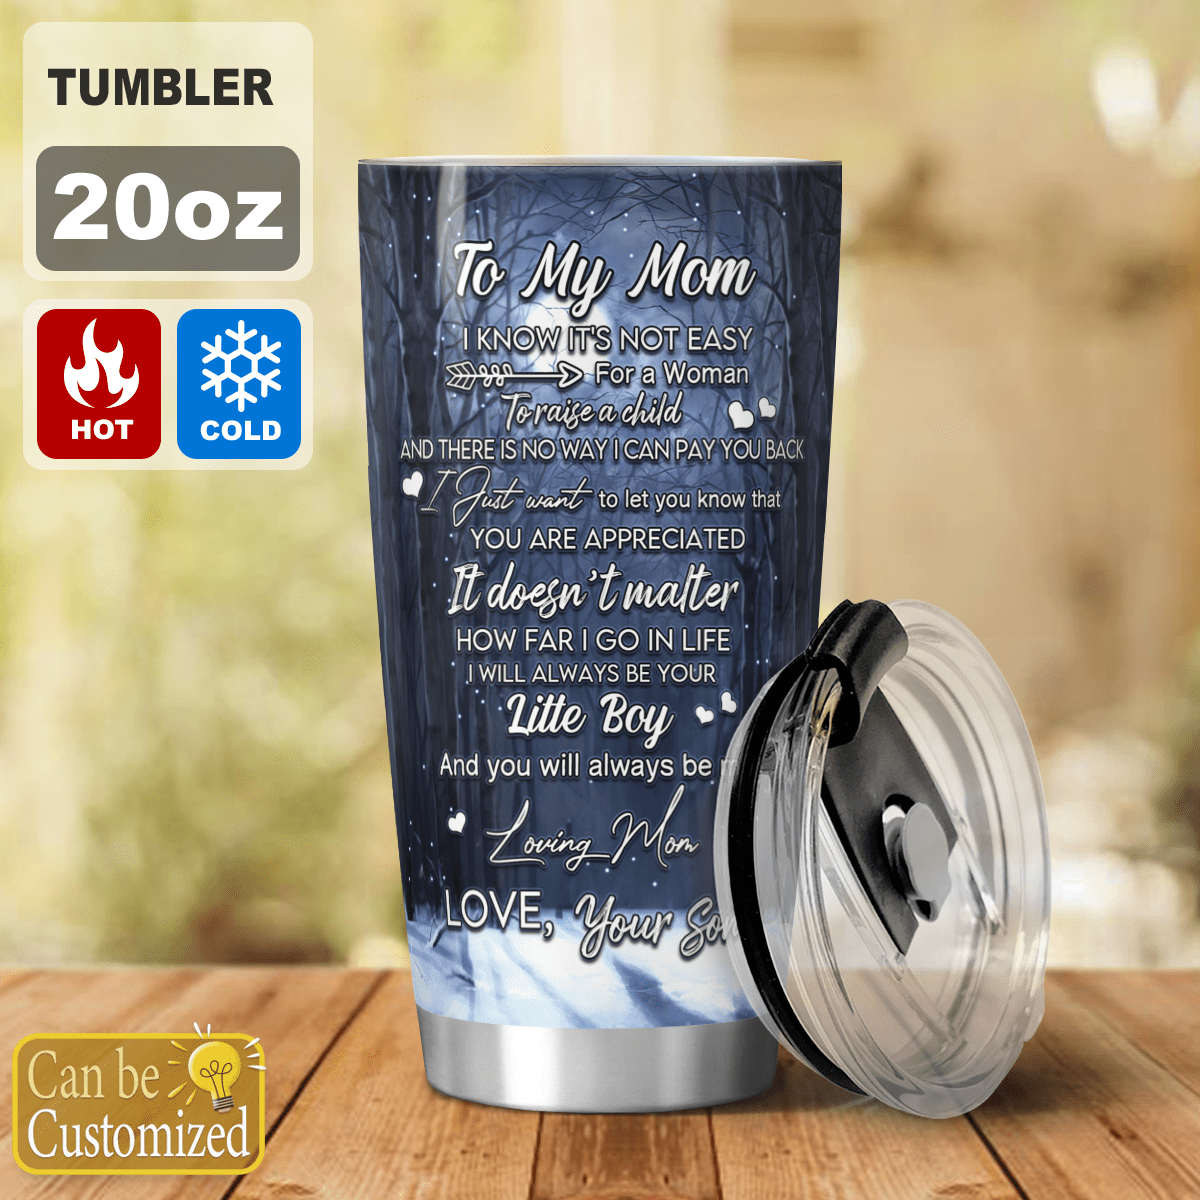 Wolf To My Mom Personalized Stainless Steel Tumbler